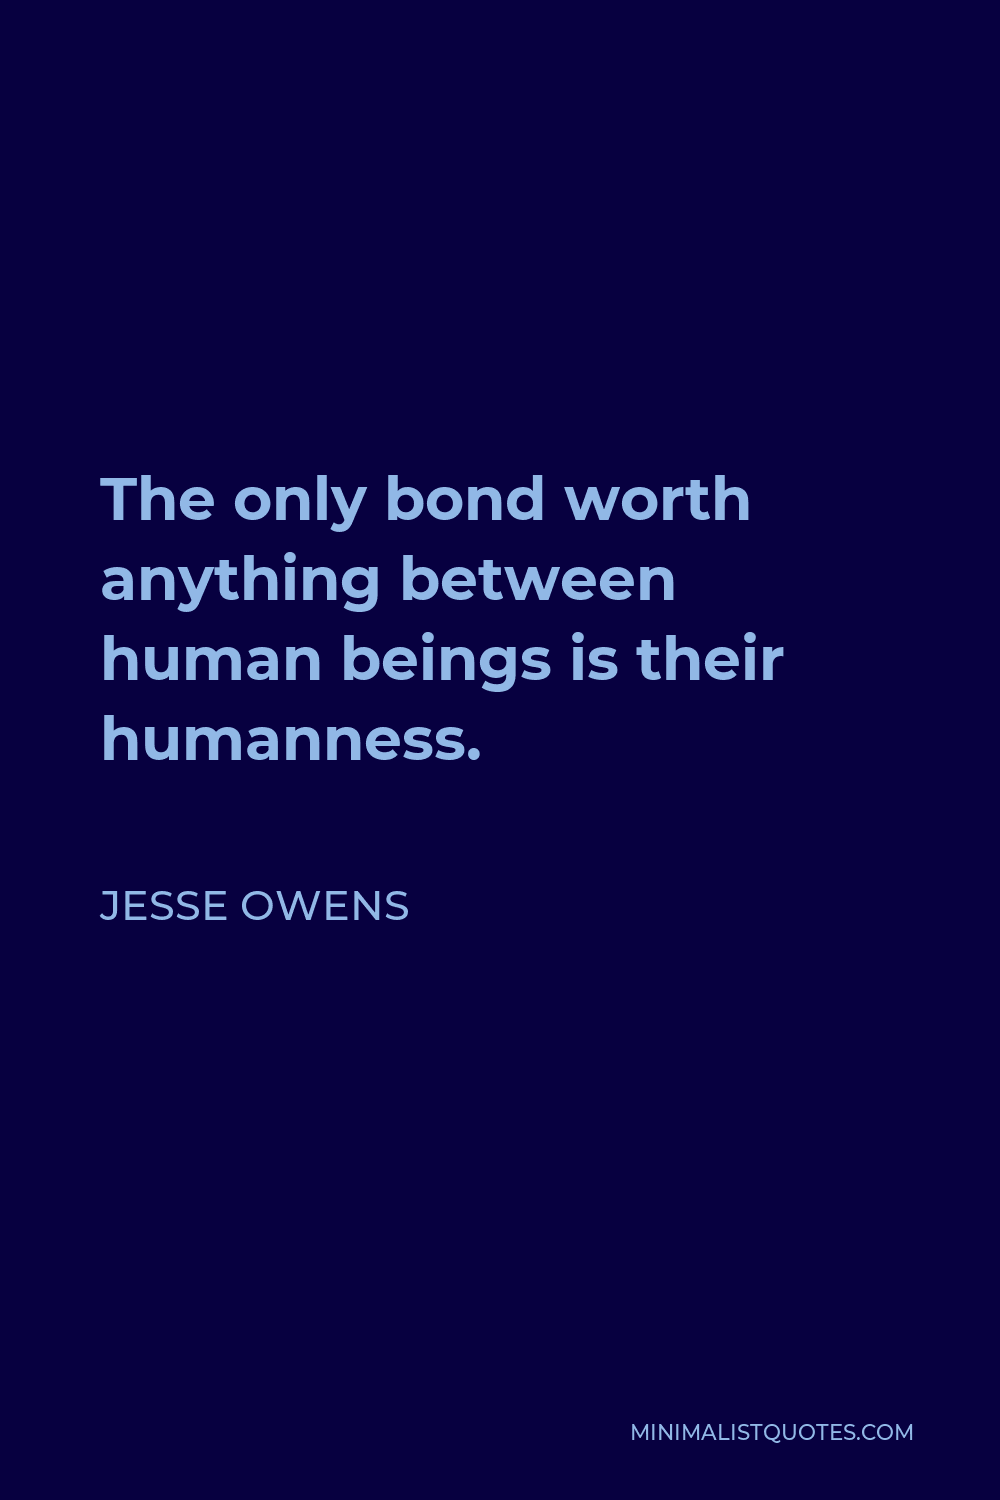 Jesse Owens Quote - The only bond worth anything between human beings is their humanness.